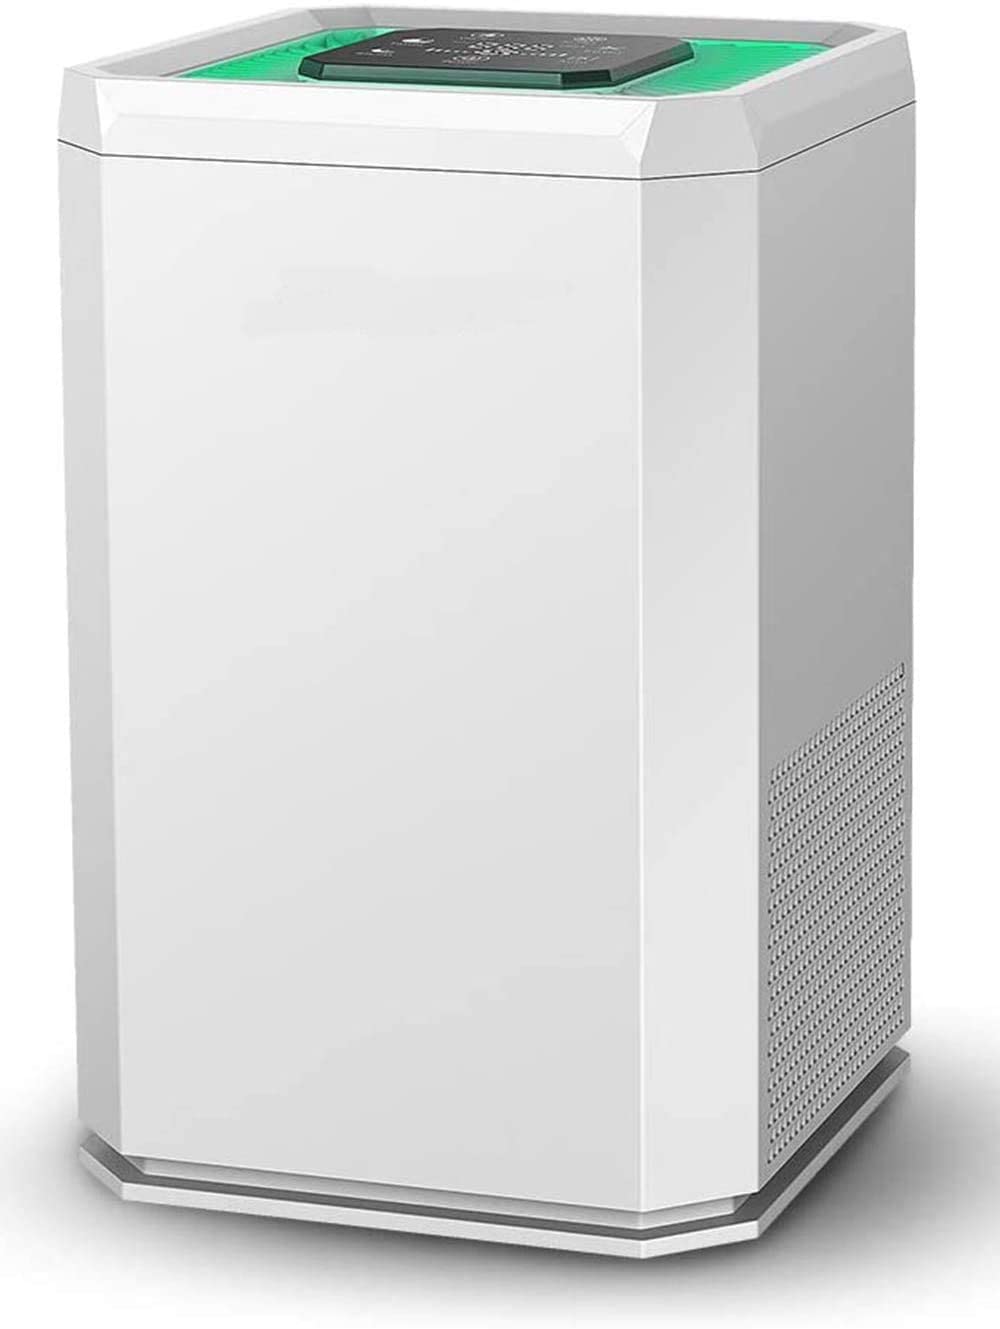 Air Purifier for Home Bedroom with True HEPA Filter, Auto Air Quality Monitoring